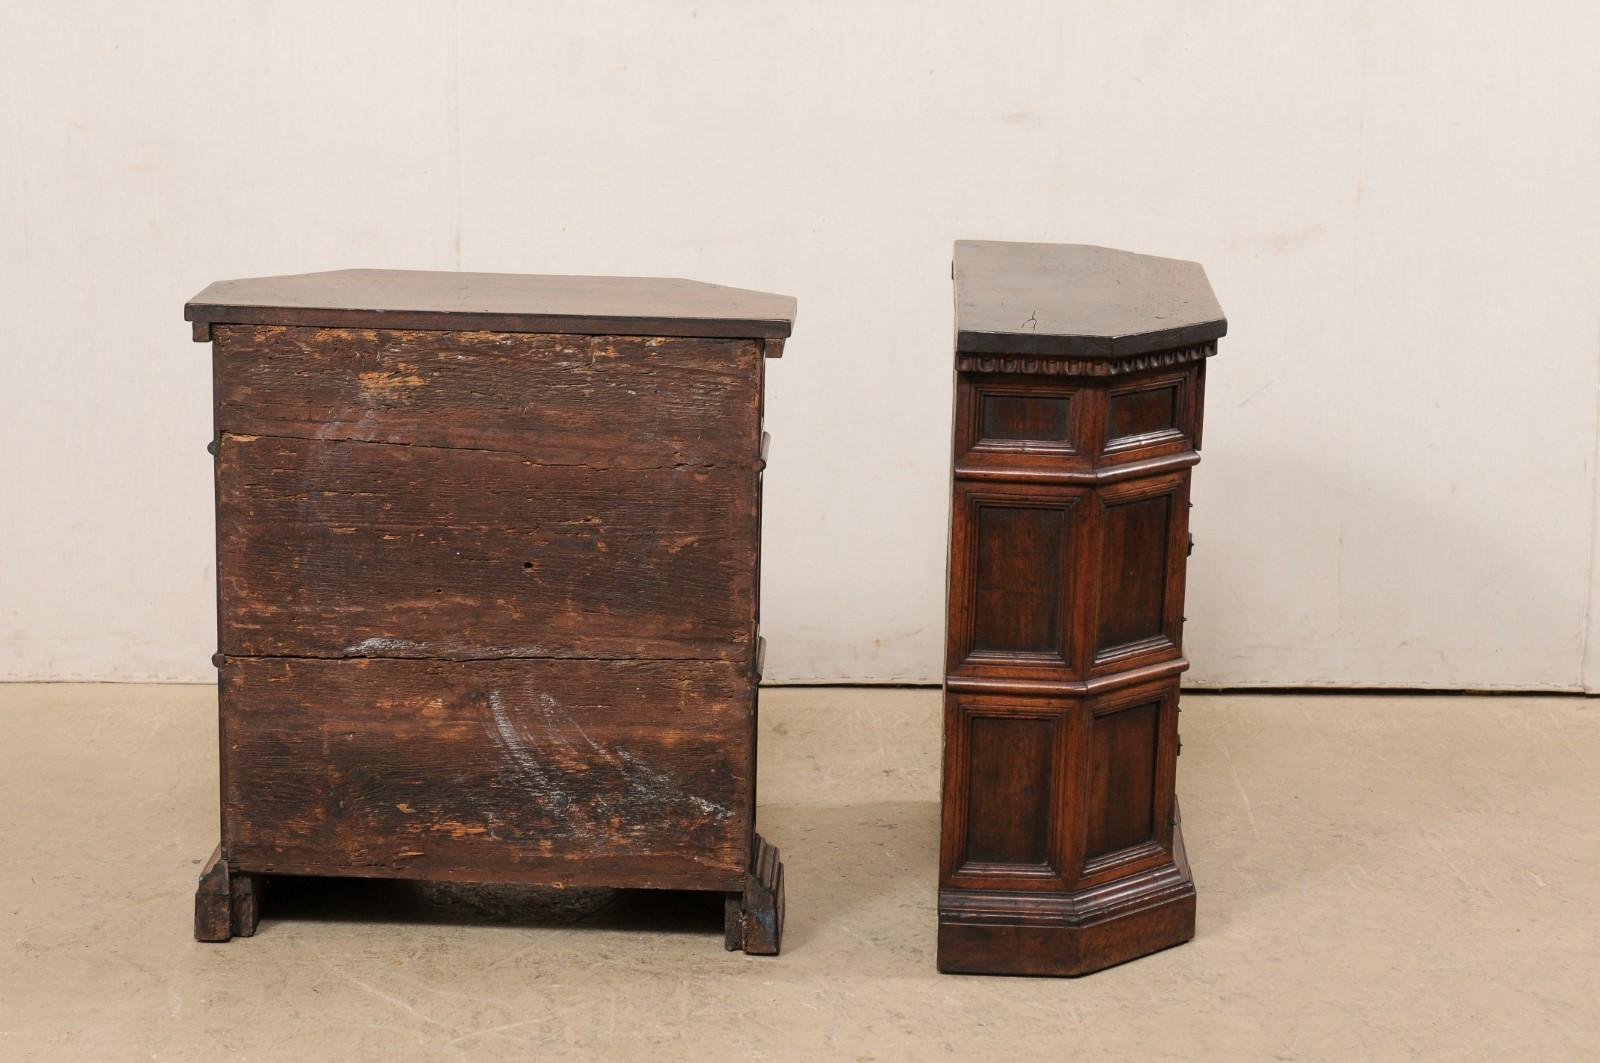 Italian Petite-Sized Paneled & Carved Console Cabinets, Early 19th Century 7